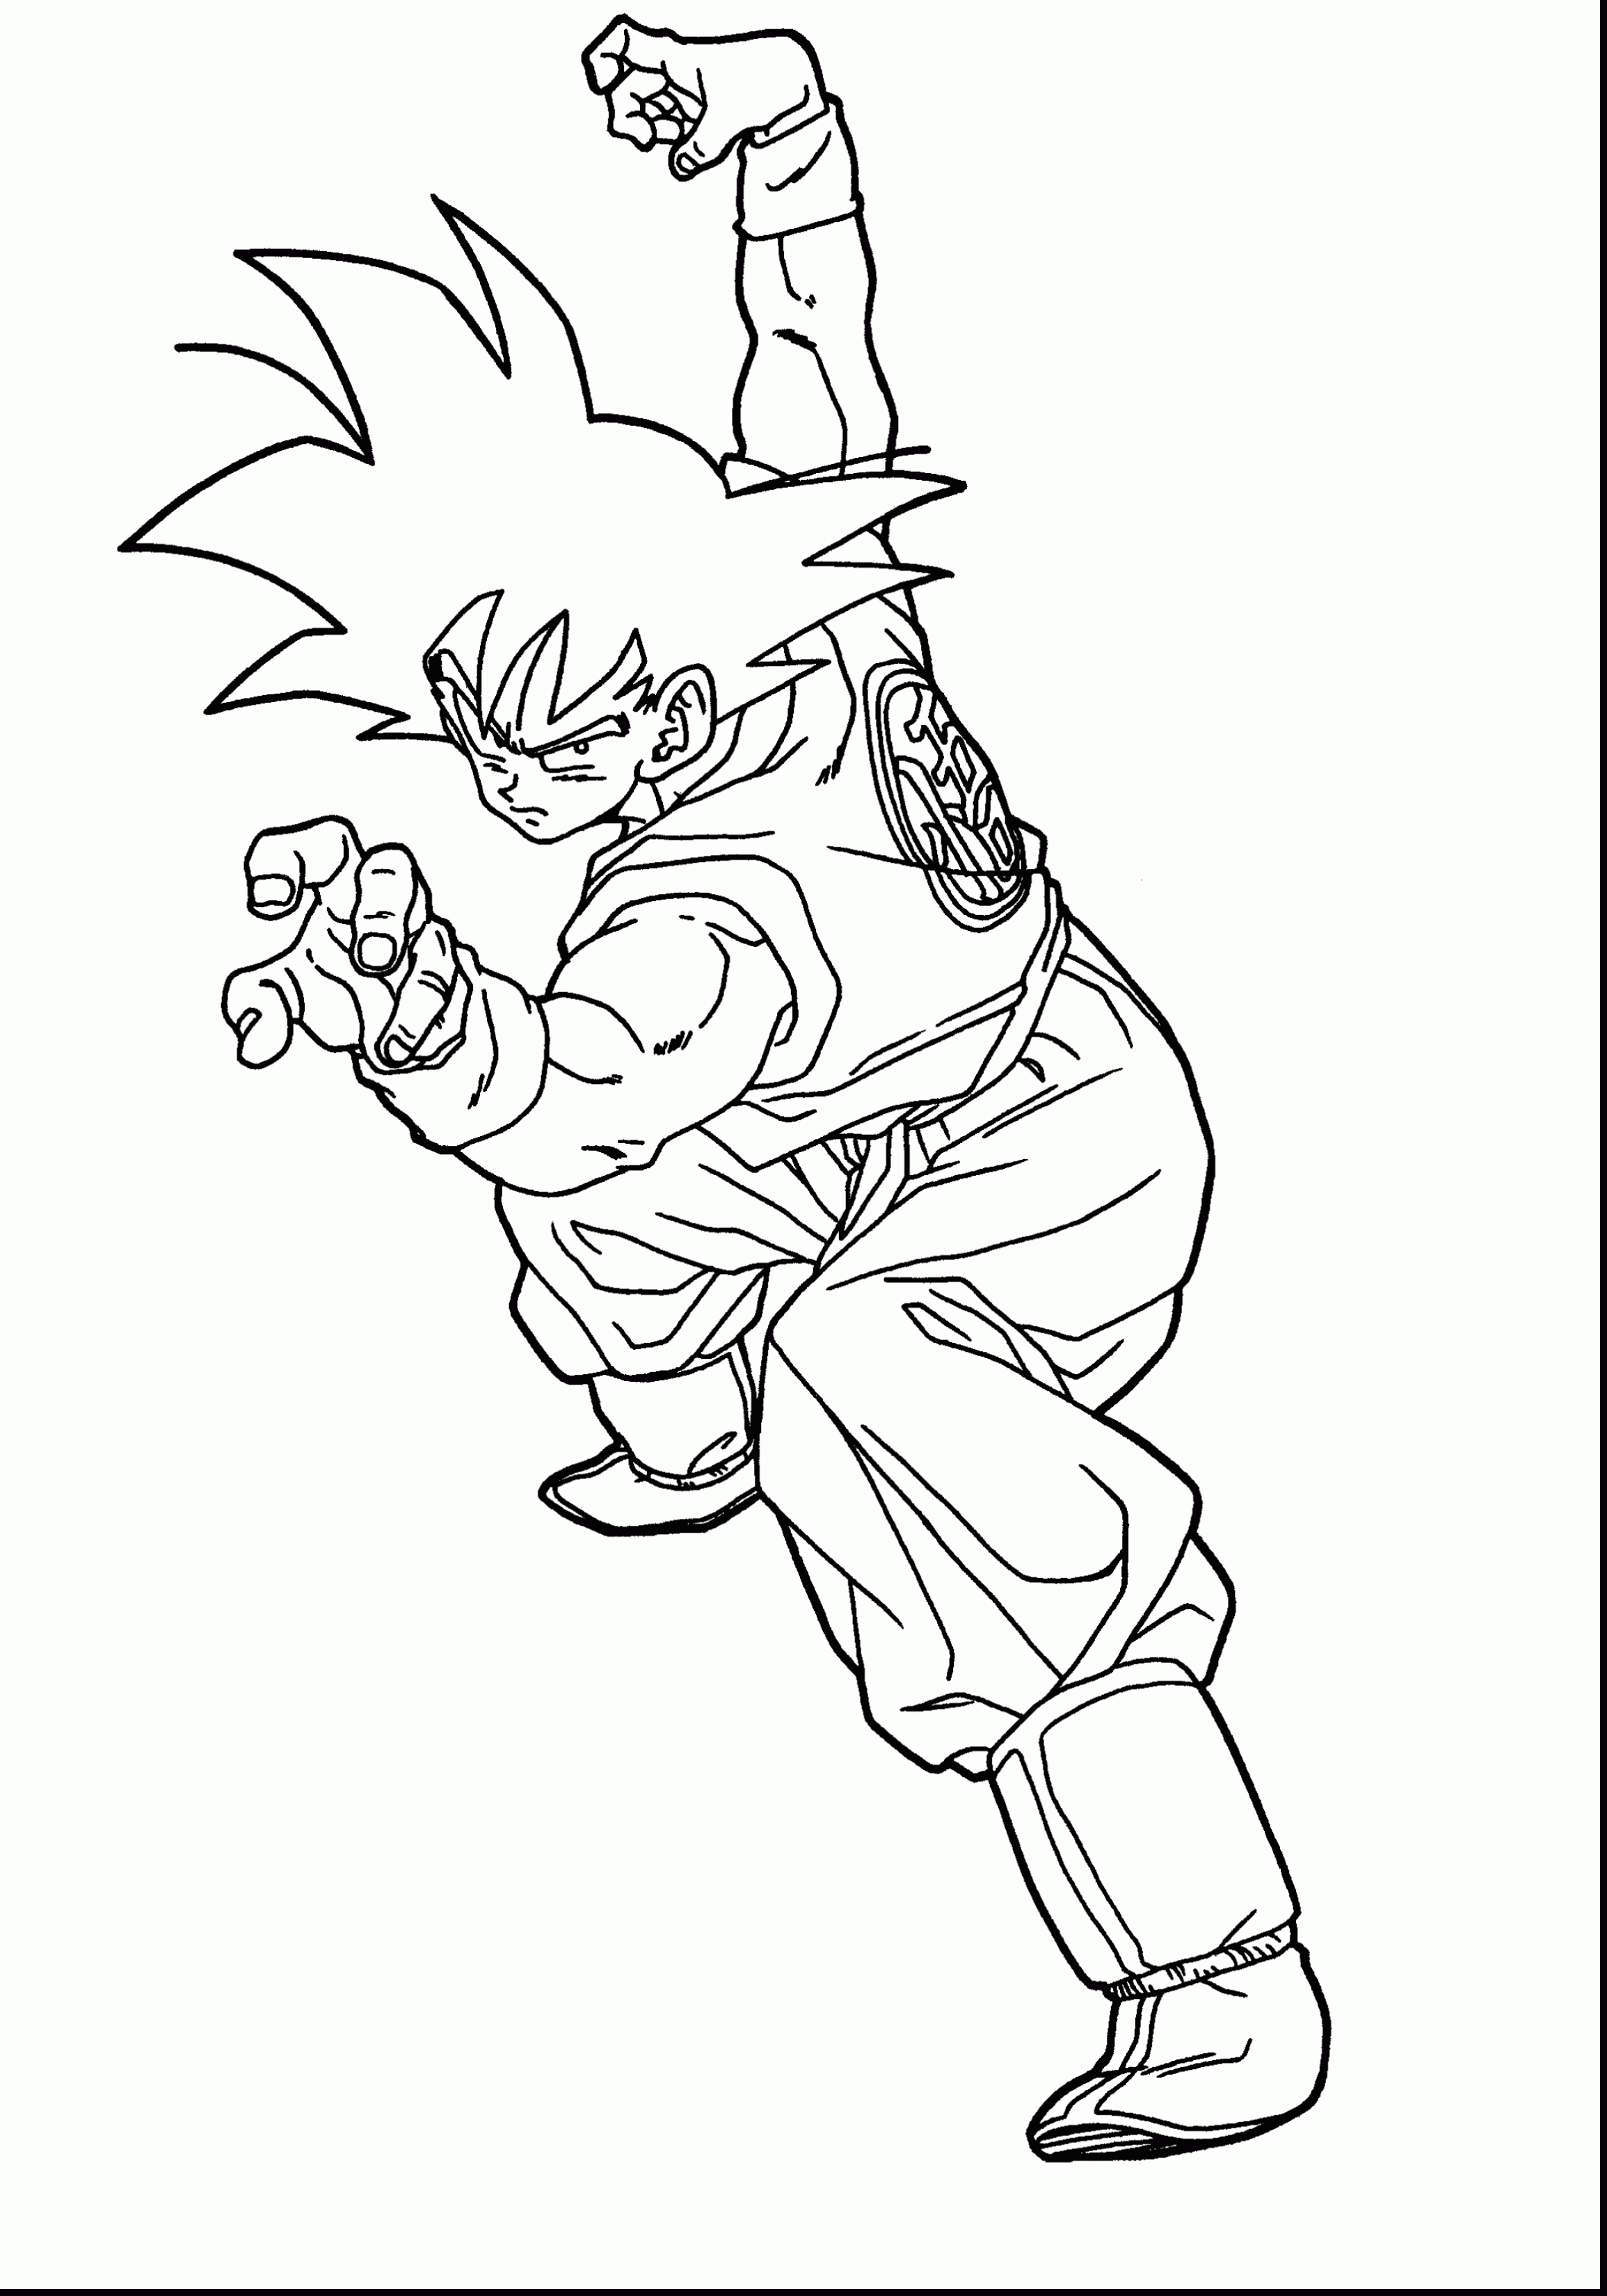 Download SonGoku - Dragon Ball Z Kids Coloring Pages